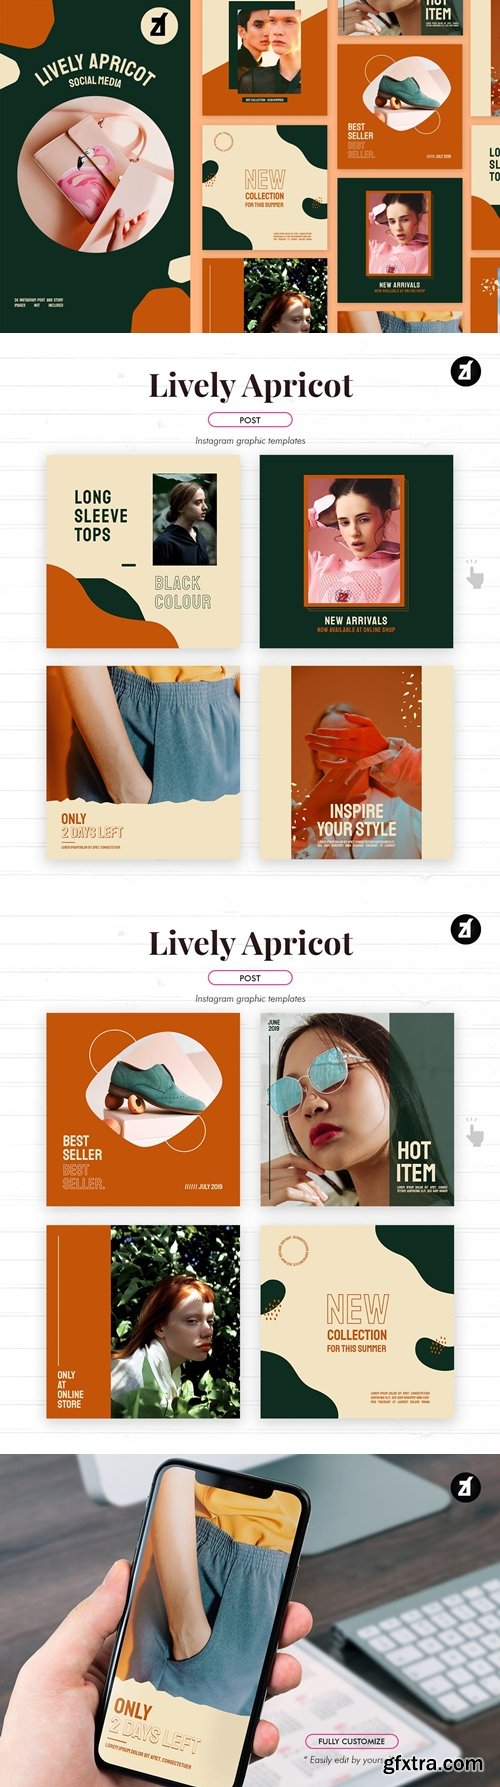 Lively apricot social media graphic templates